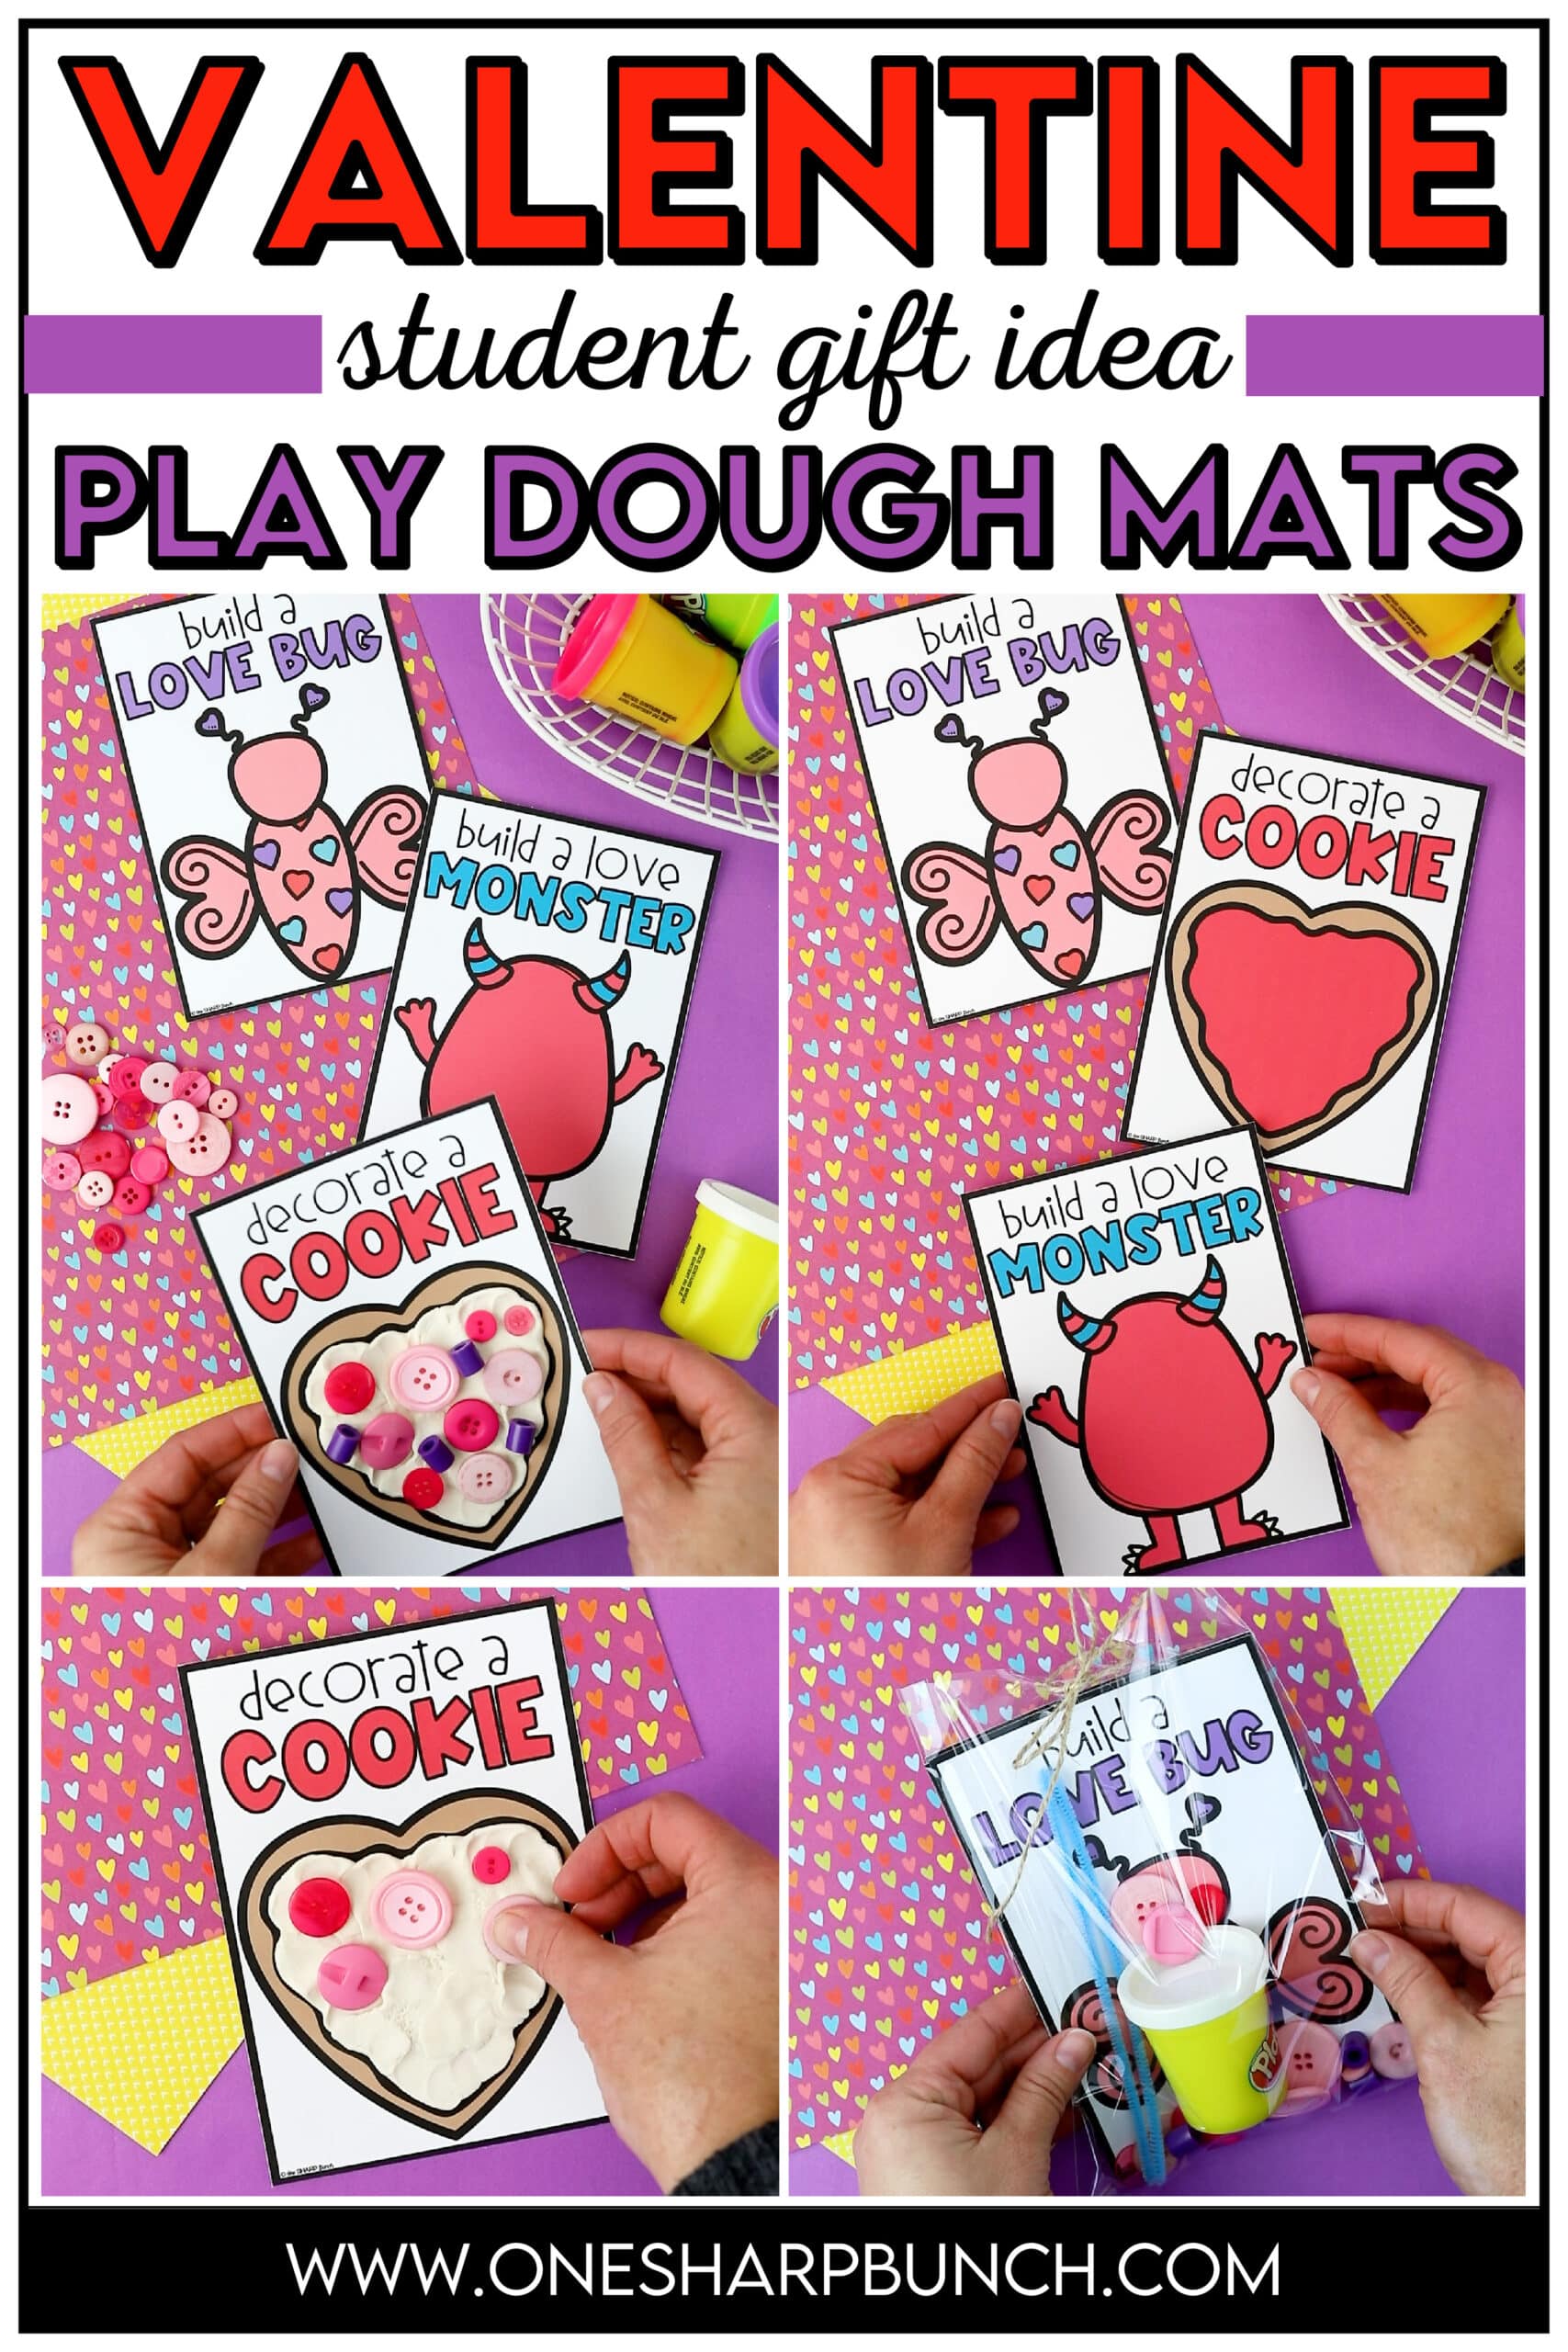 Build fine motor skills and imaginative play with these individual Valentine’s play dough kits for Valentine's Day student gifts! This Valentine’s Day party activity serves as both a Valentine’s craft and a Valentine’s sensory activity. Students will create their own Valentine’s designs using the Valentine’s play dough mats. These play dough kits also make a great Valentine’s student gift. Your students will love these Valentine’s Day fine motor activities during your Valentine’s party stations!